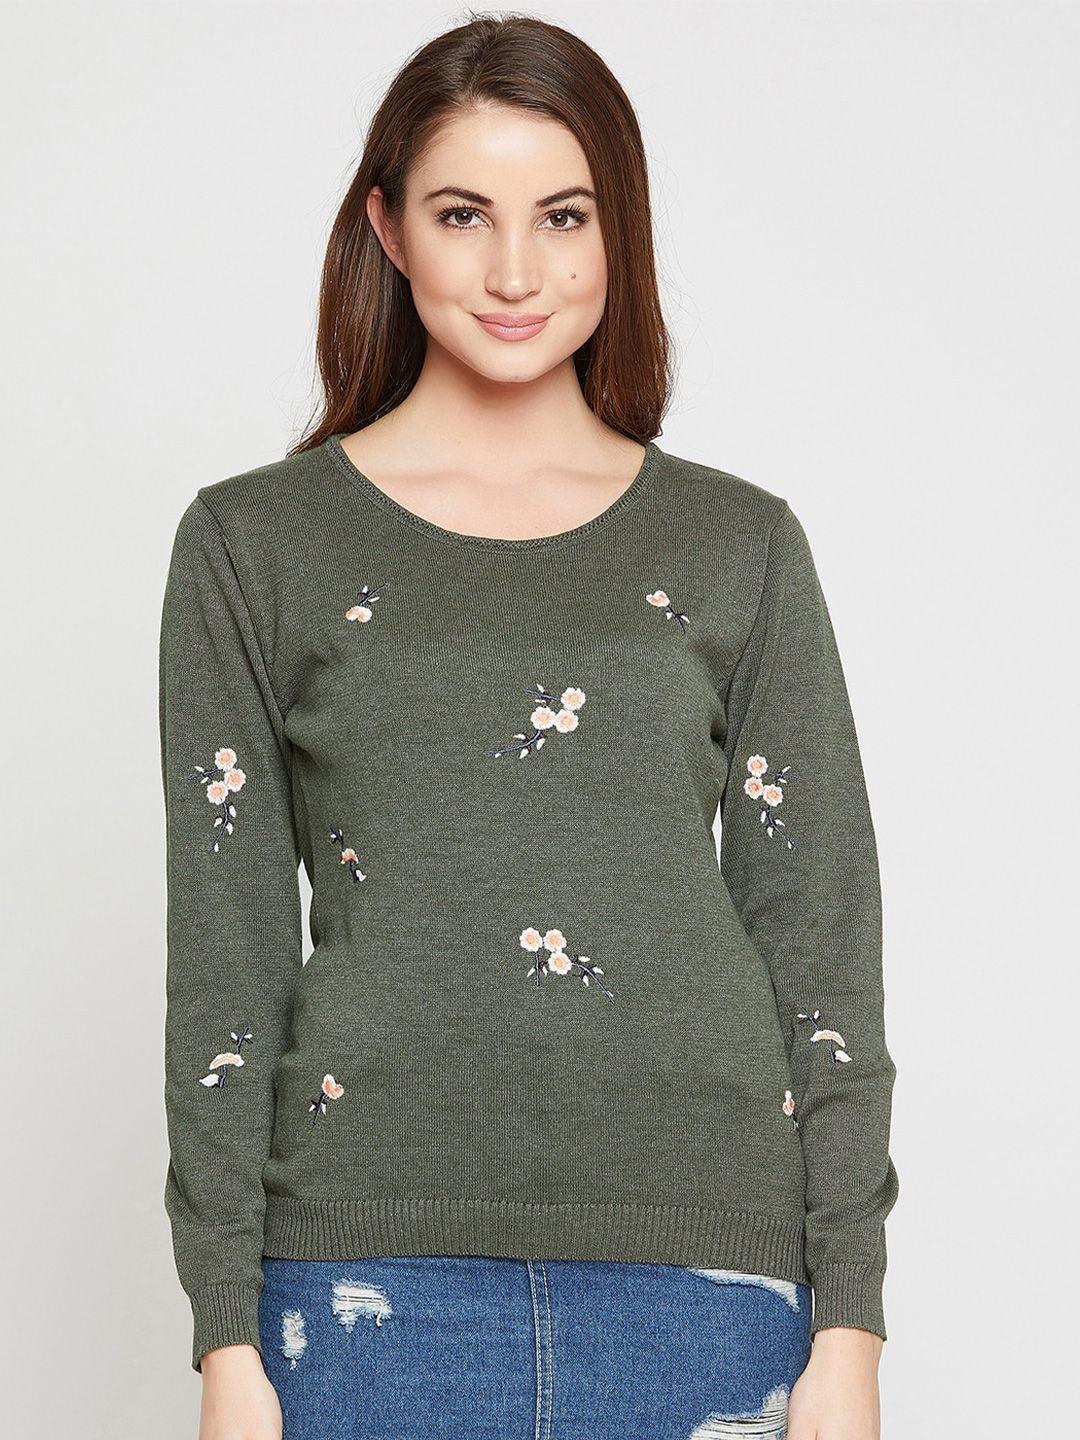 marie claire floral embroidered woollen pullover